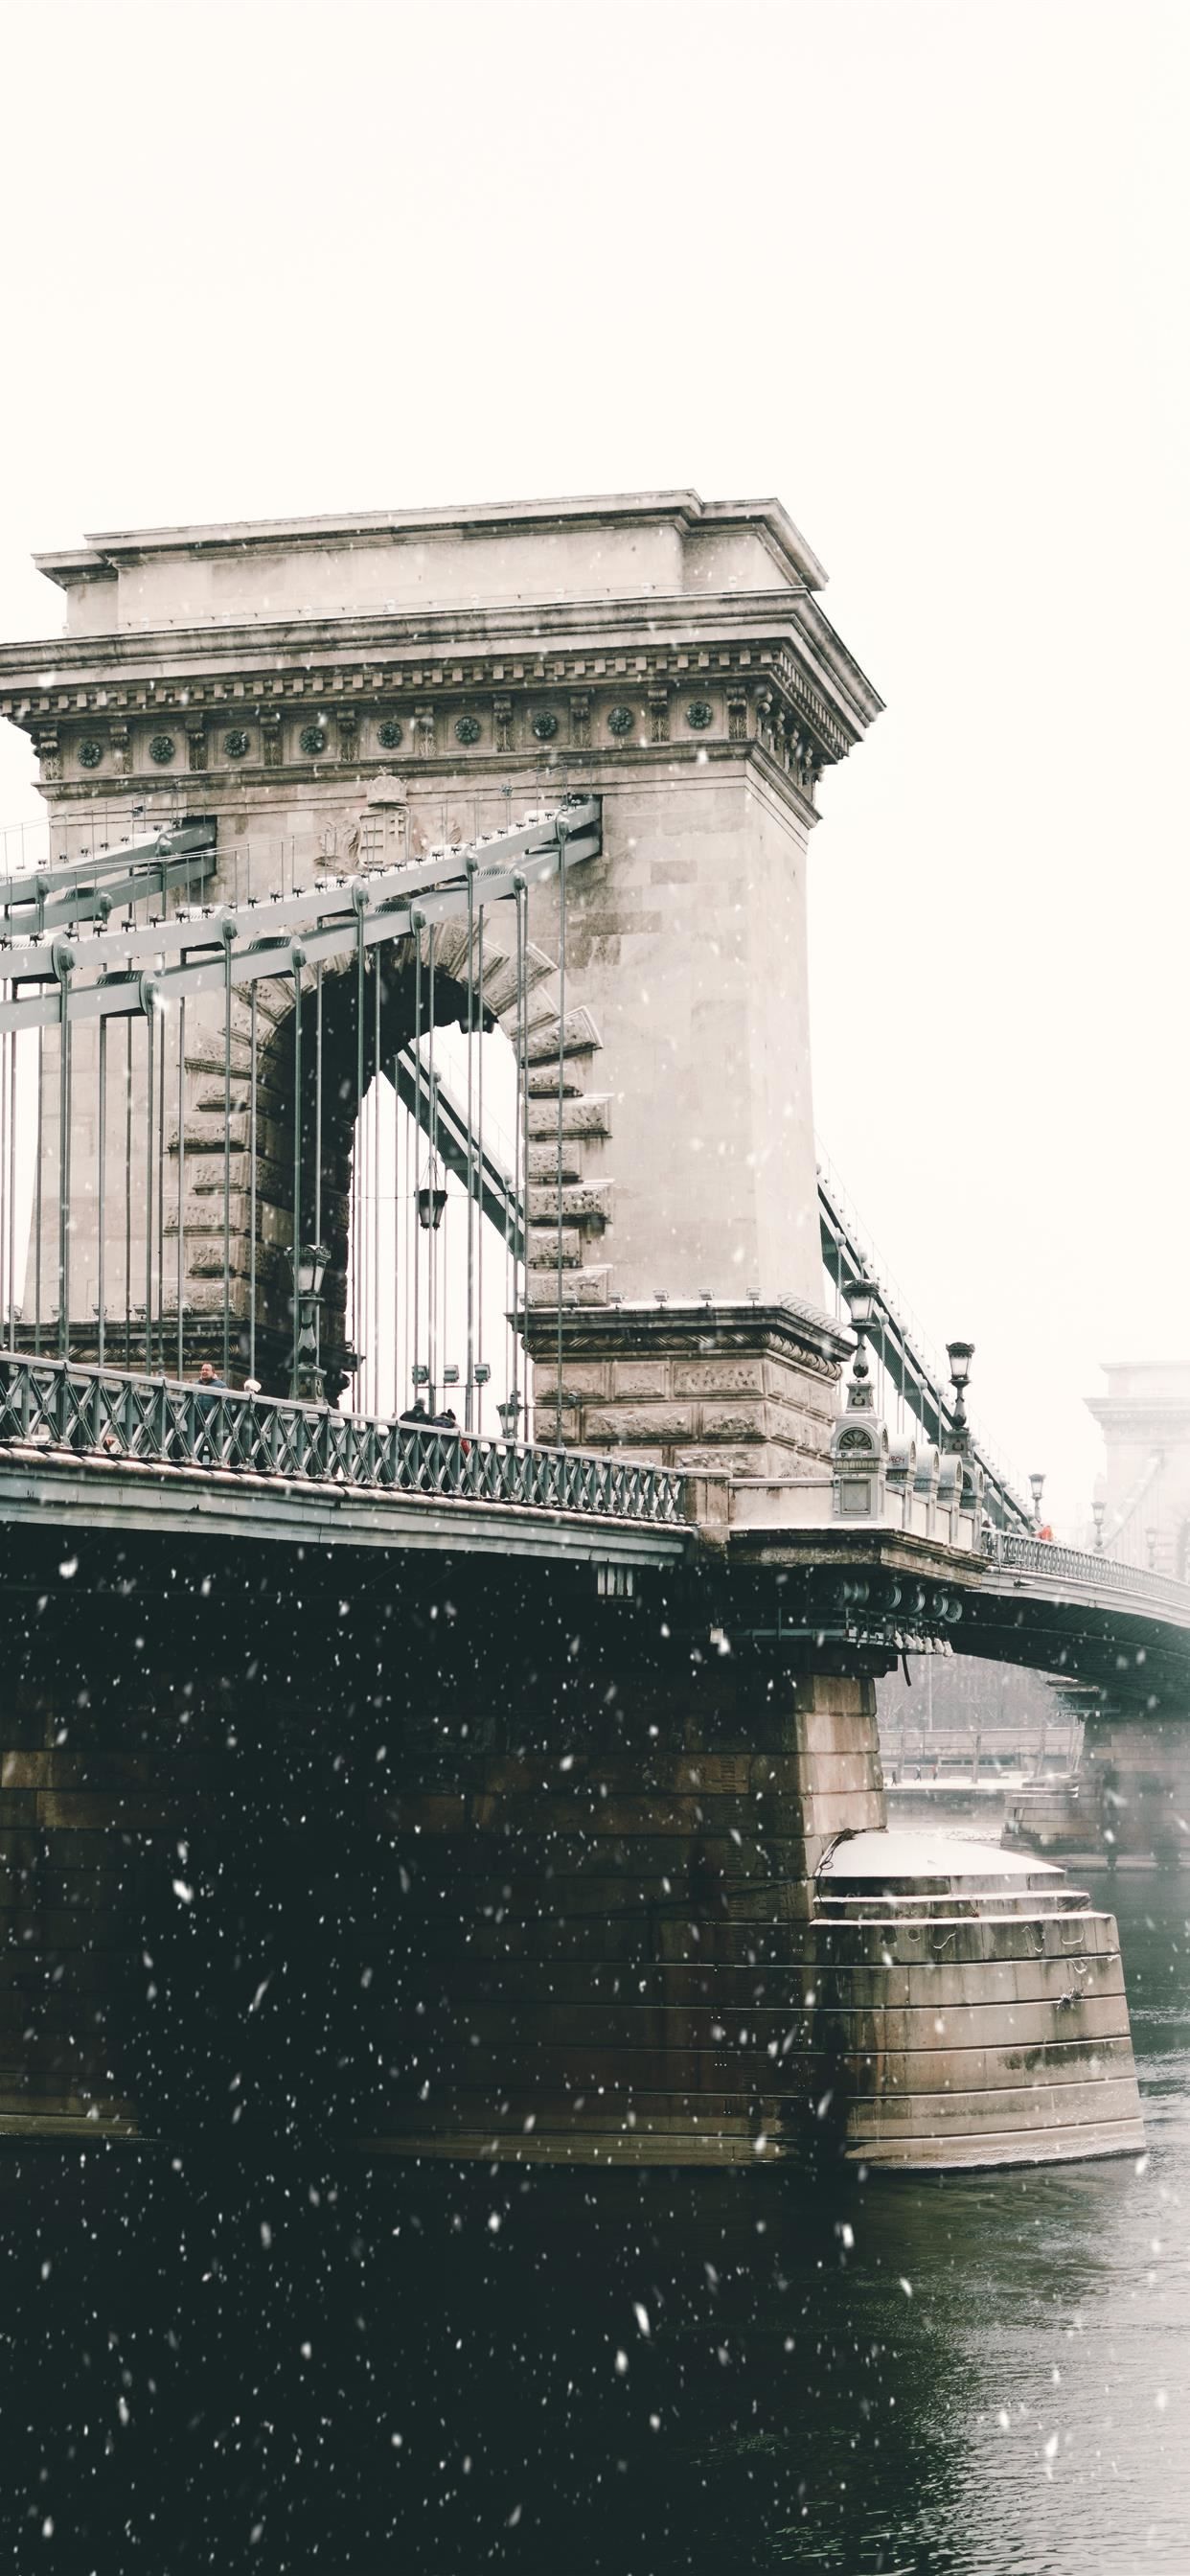 A snowing day in Budapest, Hungary. - Architecture